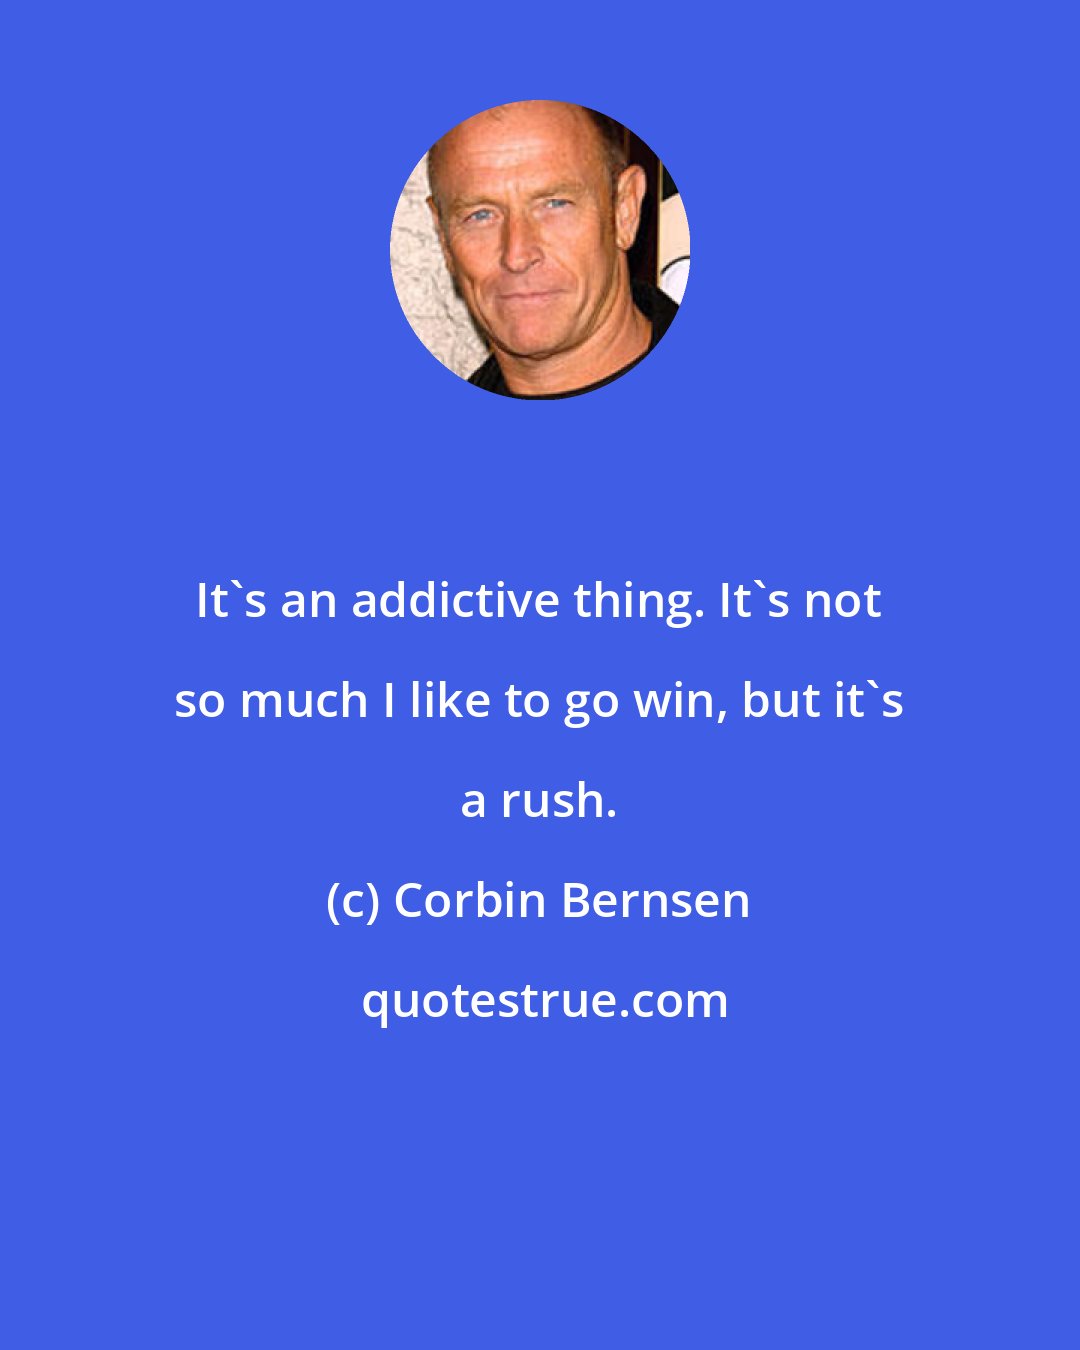 Corbin Bernsen: It's an addictive thing. It's not so much I like to go win, but it's a rush.